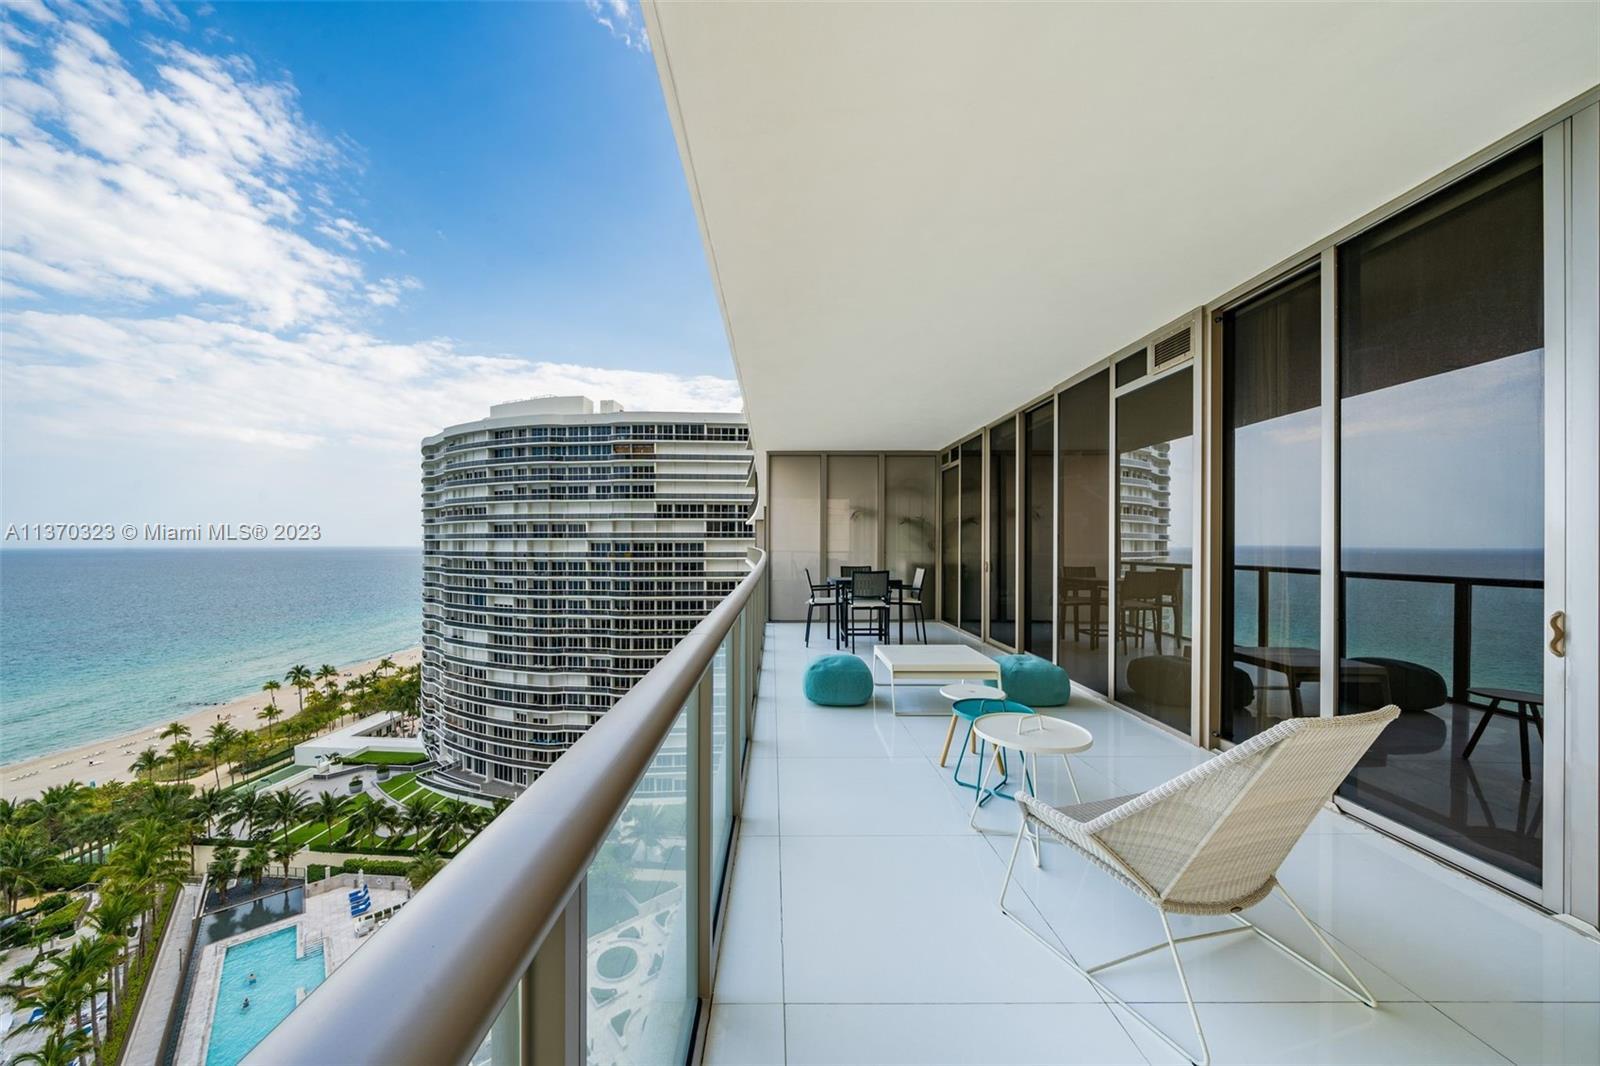 Priced to sell! Best deal at the iconic St. Regis Bal Harbour! Spectacular 4 bedrooms, 4.5 bath resi